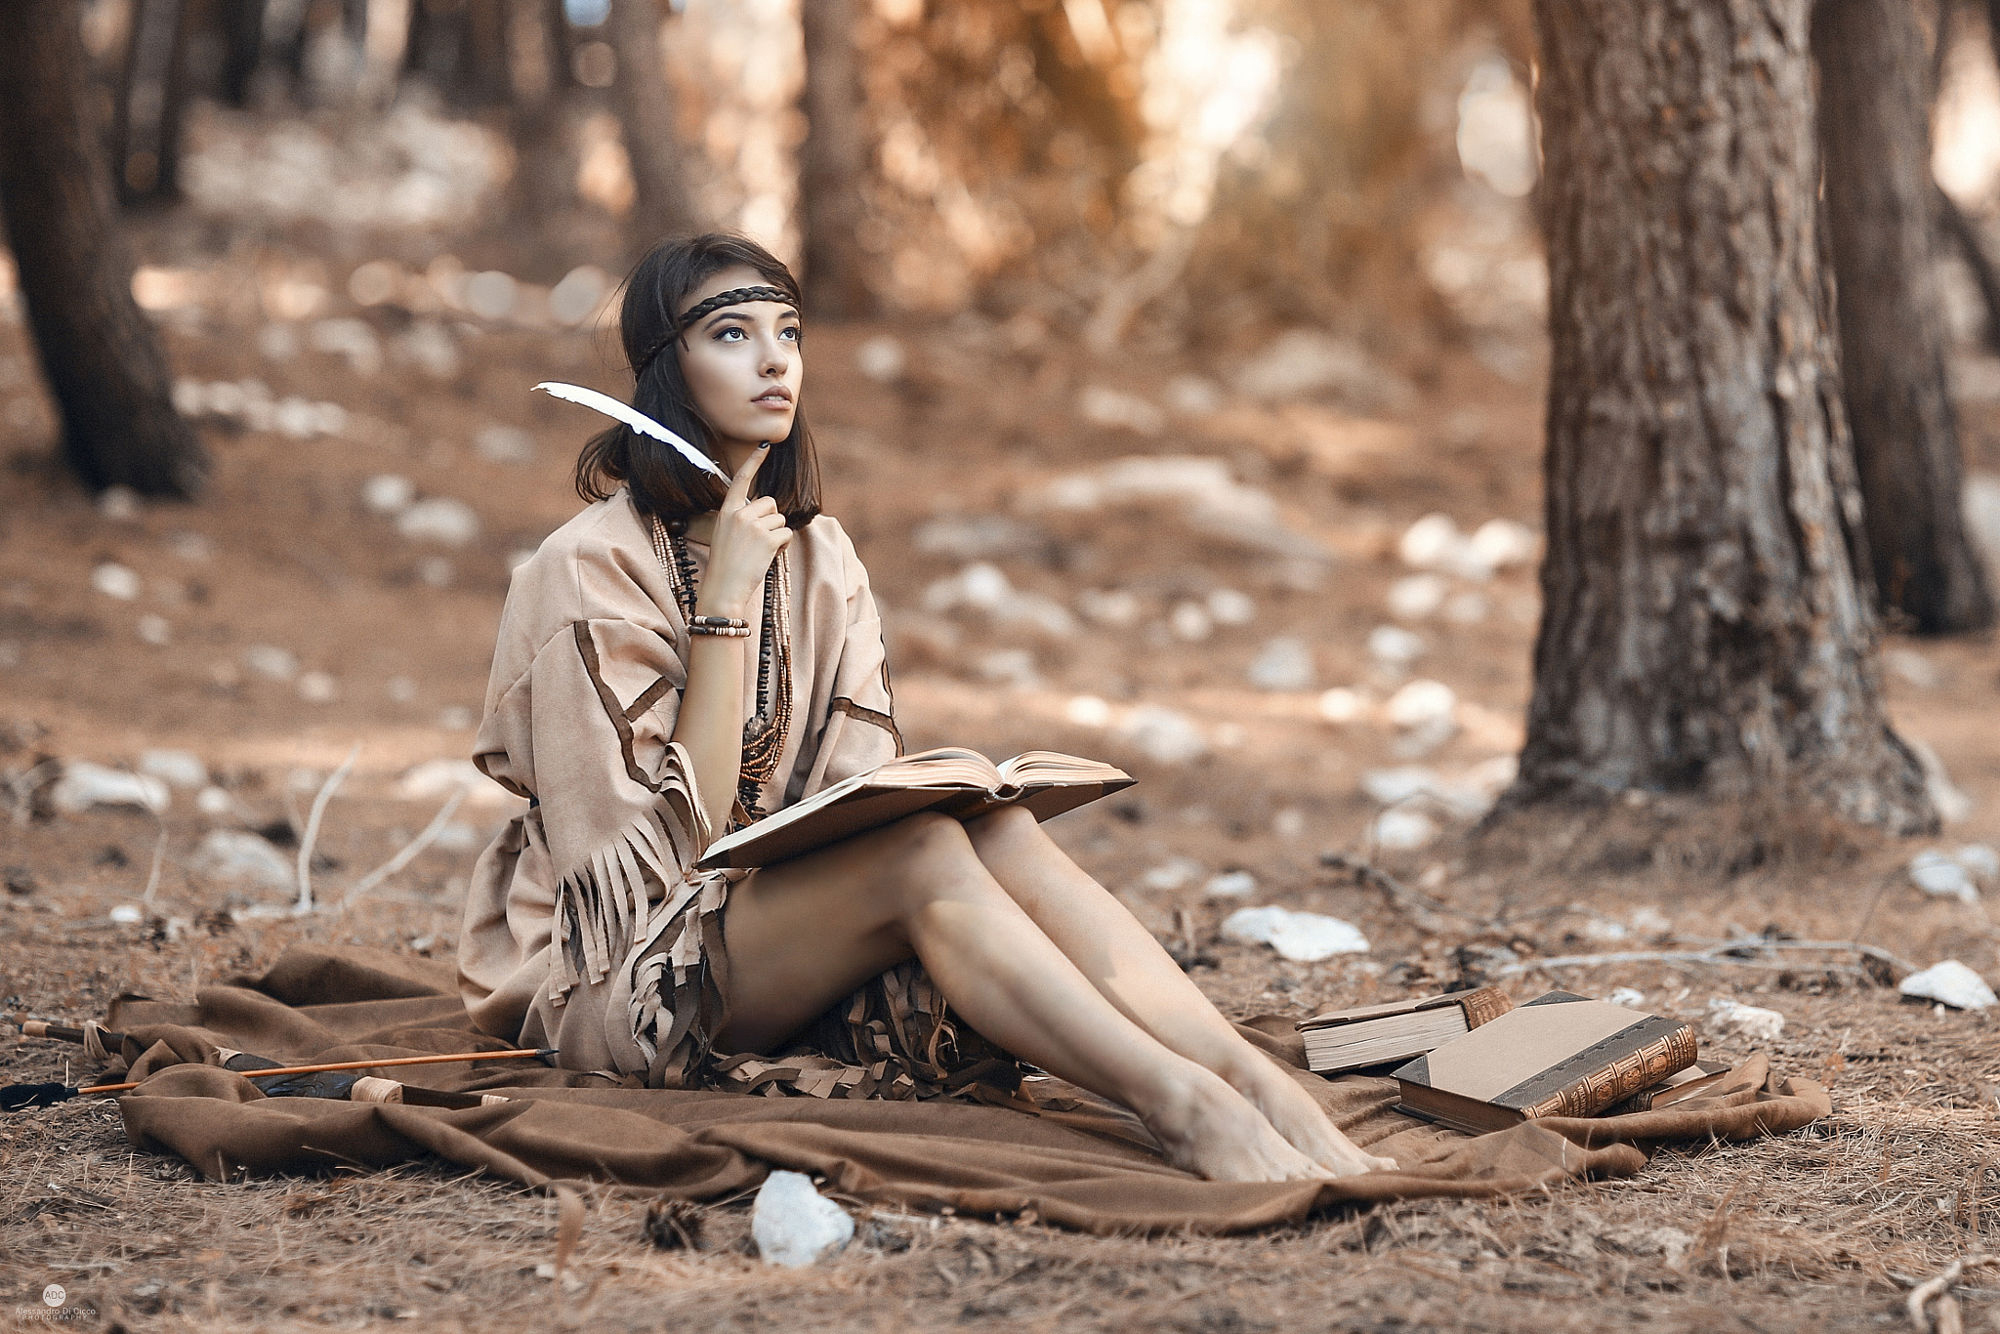 People 2000x1334 Alessandro Di Cicco dark hair hairband Native American clothing feathers books writing pencils nature trees forest bracelets brunette barefoot women outdoors women